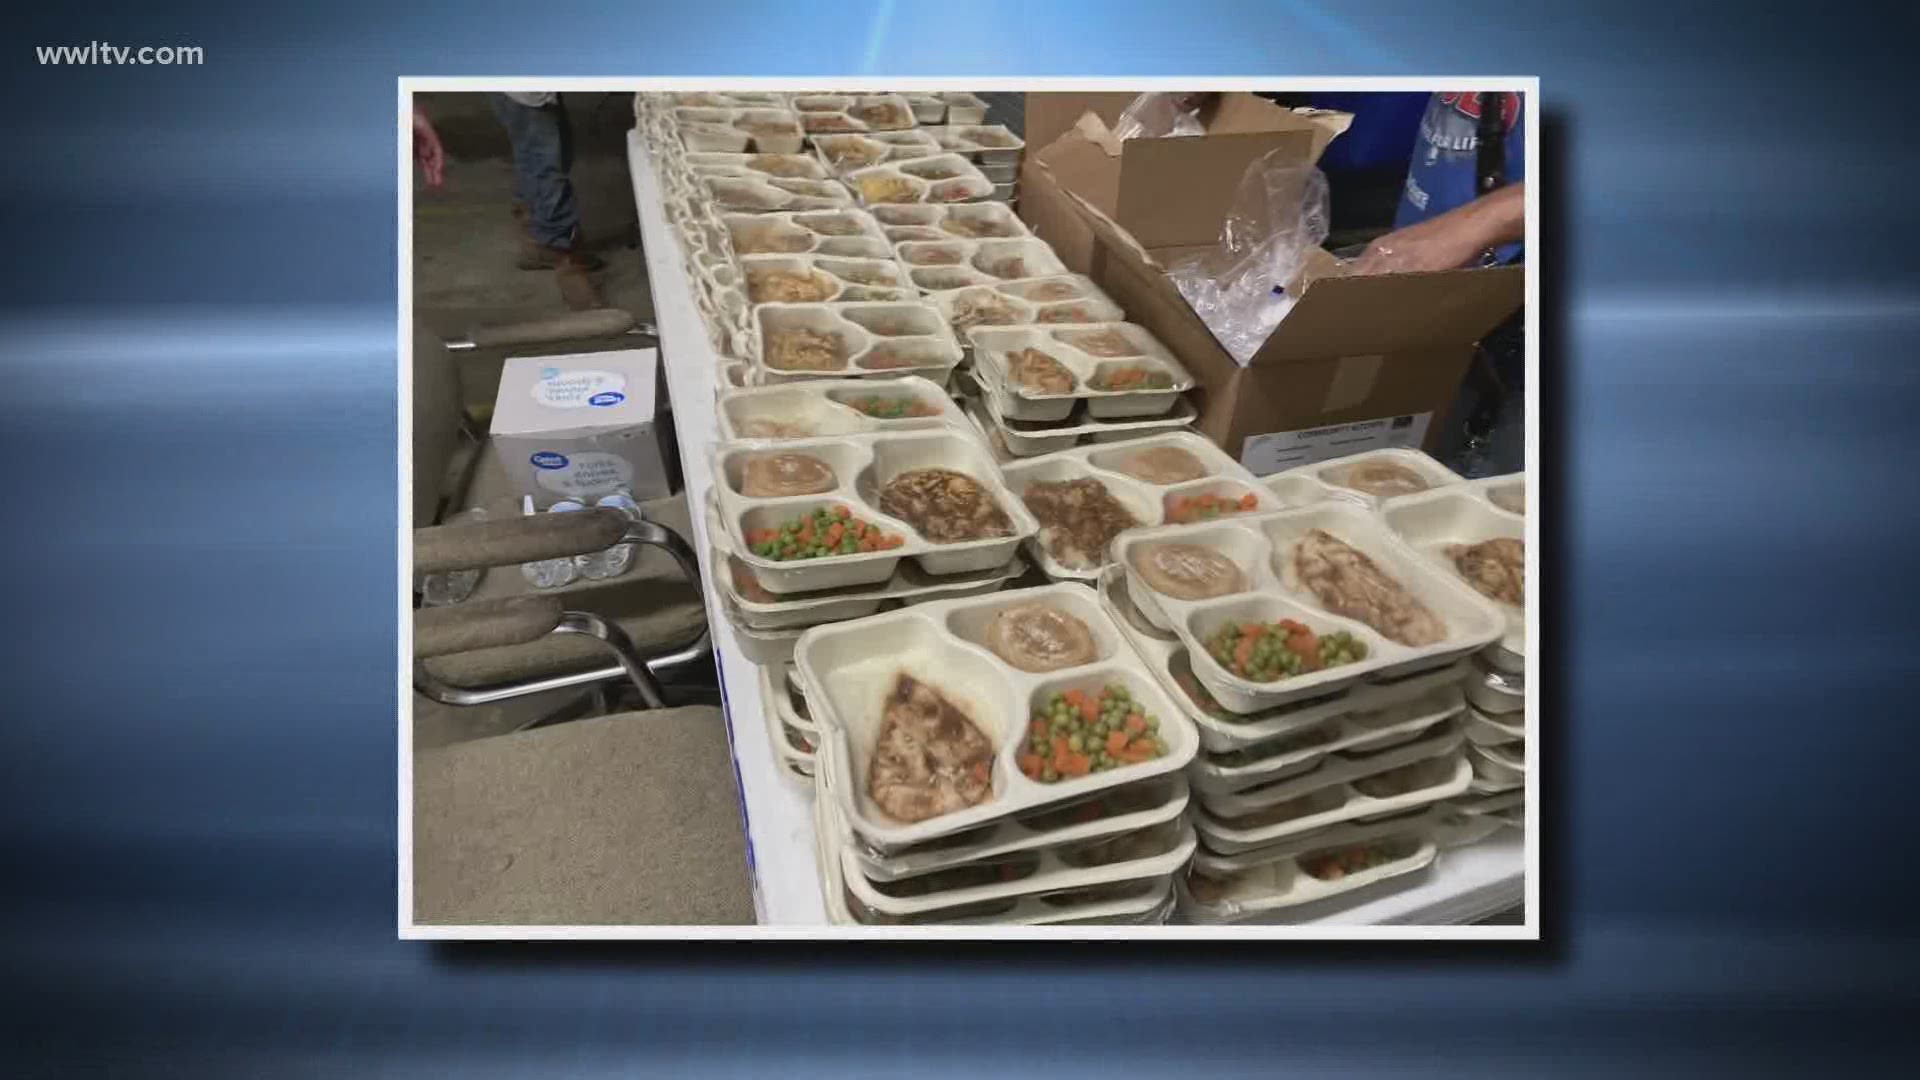 Leaders with Second Harvest say they were able to prepare thousands of meals because of volunteers helping in the organization's kitchen in Lafayette and Harahan.